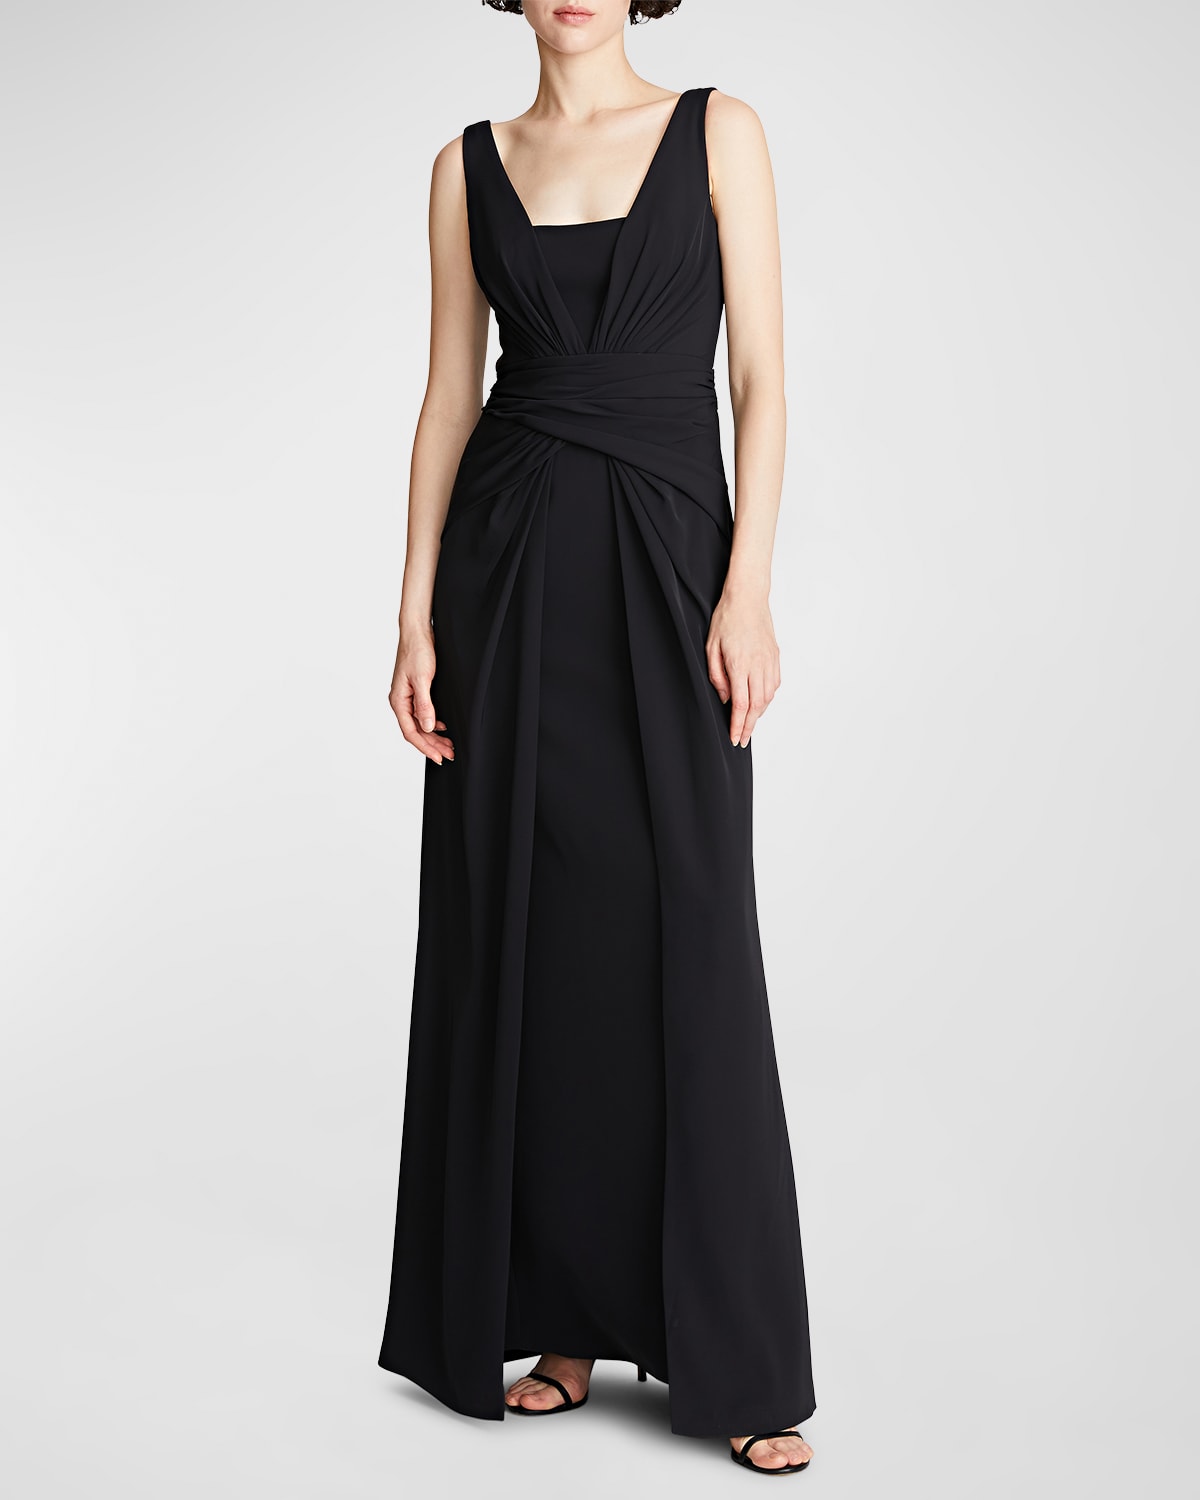 HALSTON ERICA SLEEVELESS A-LINE CREPE GOWN